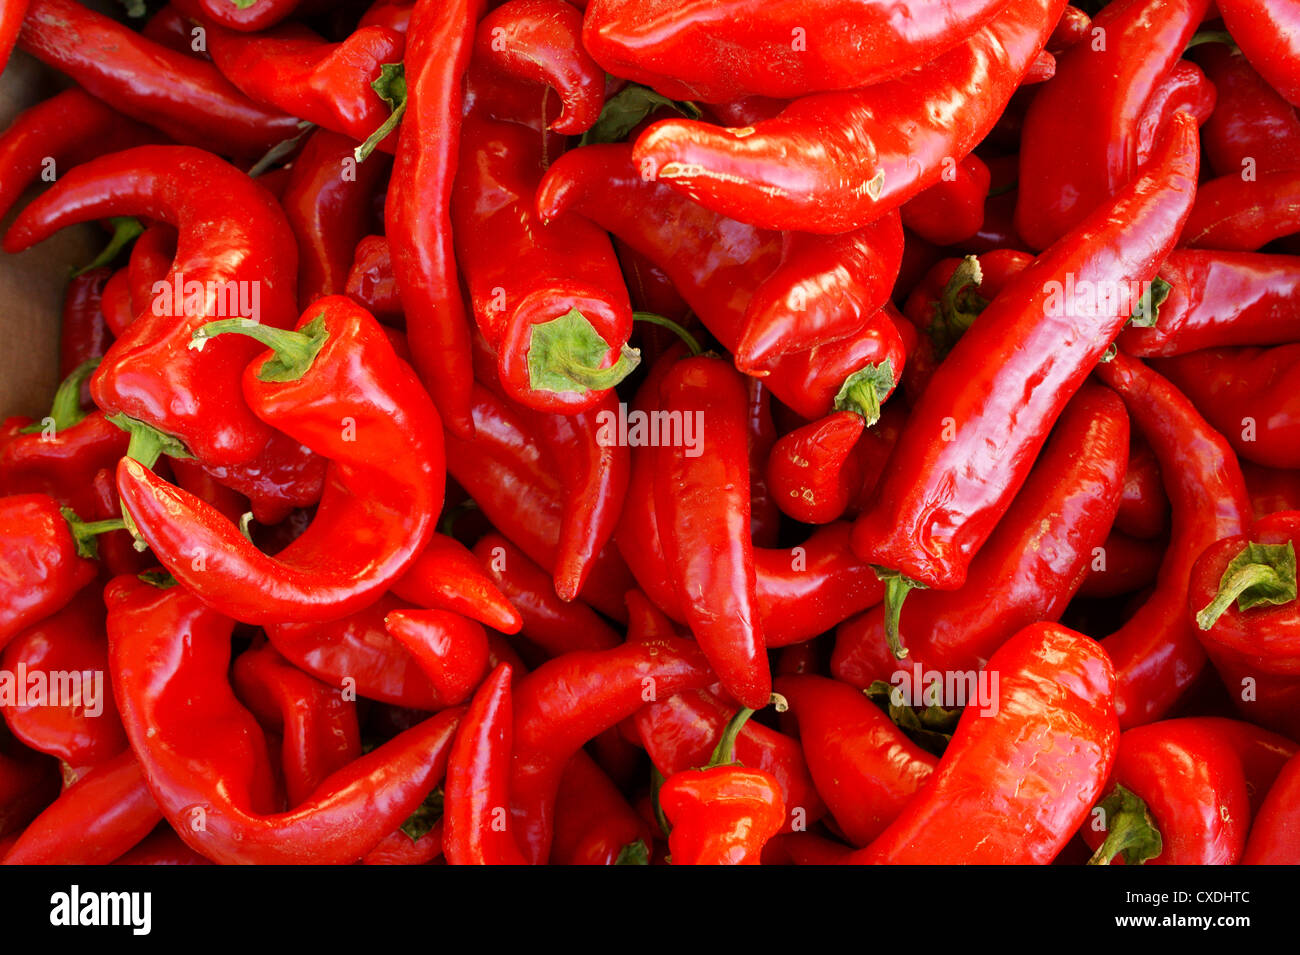 Red chili peppers at a Commercial Street market, Vancouver, BC, Canada Stock Photo